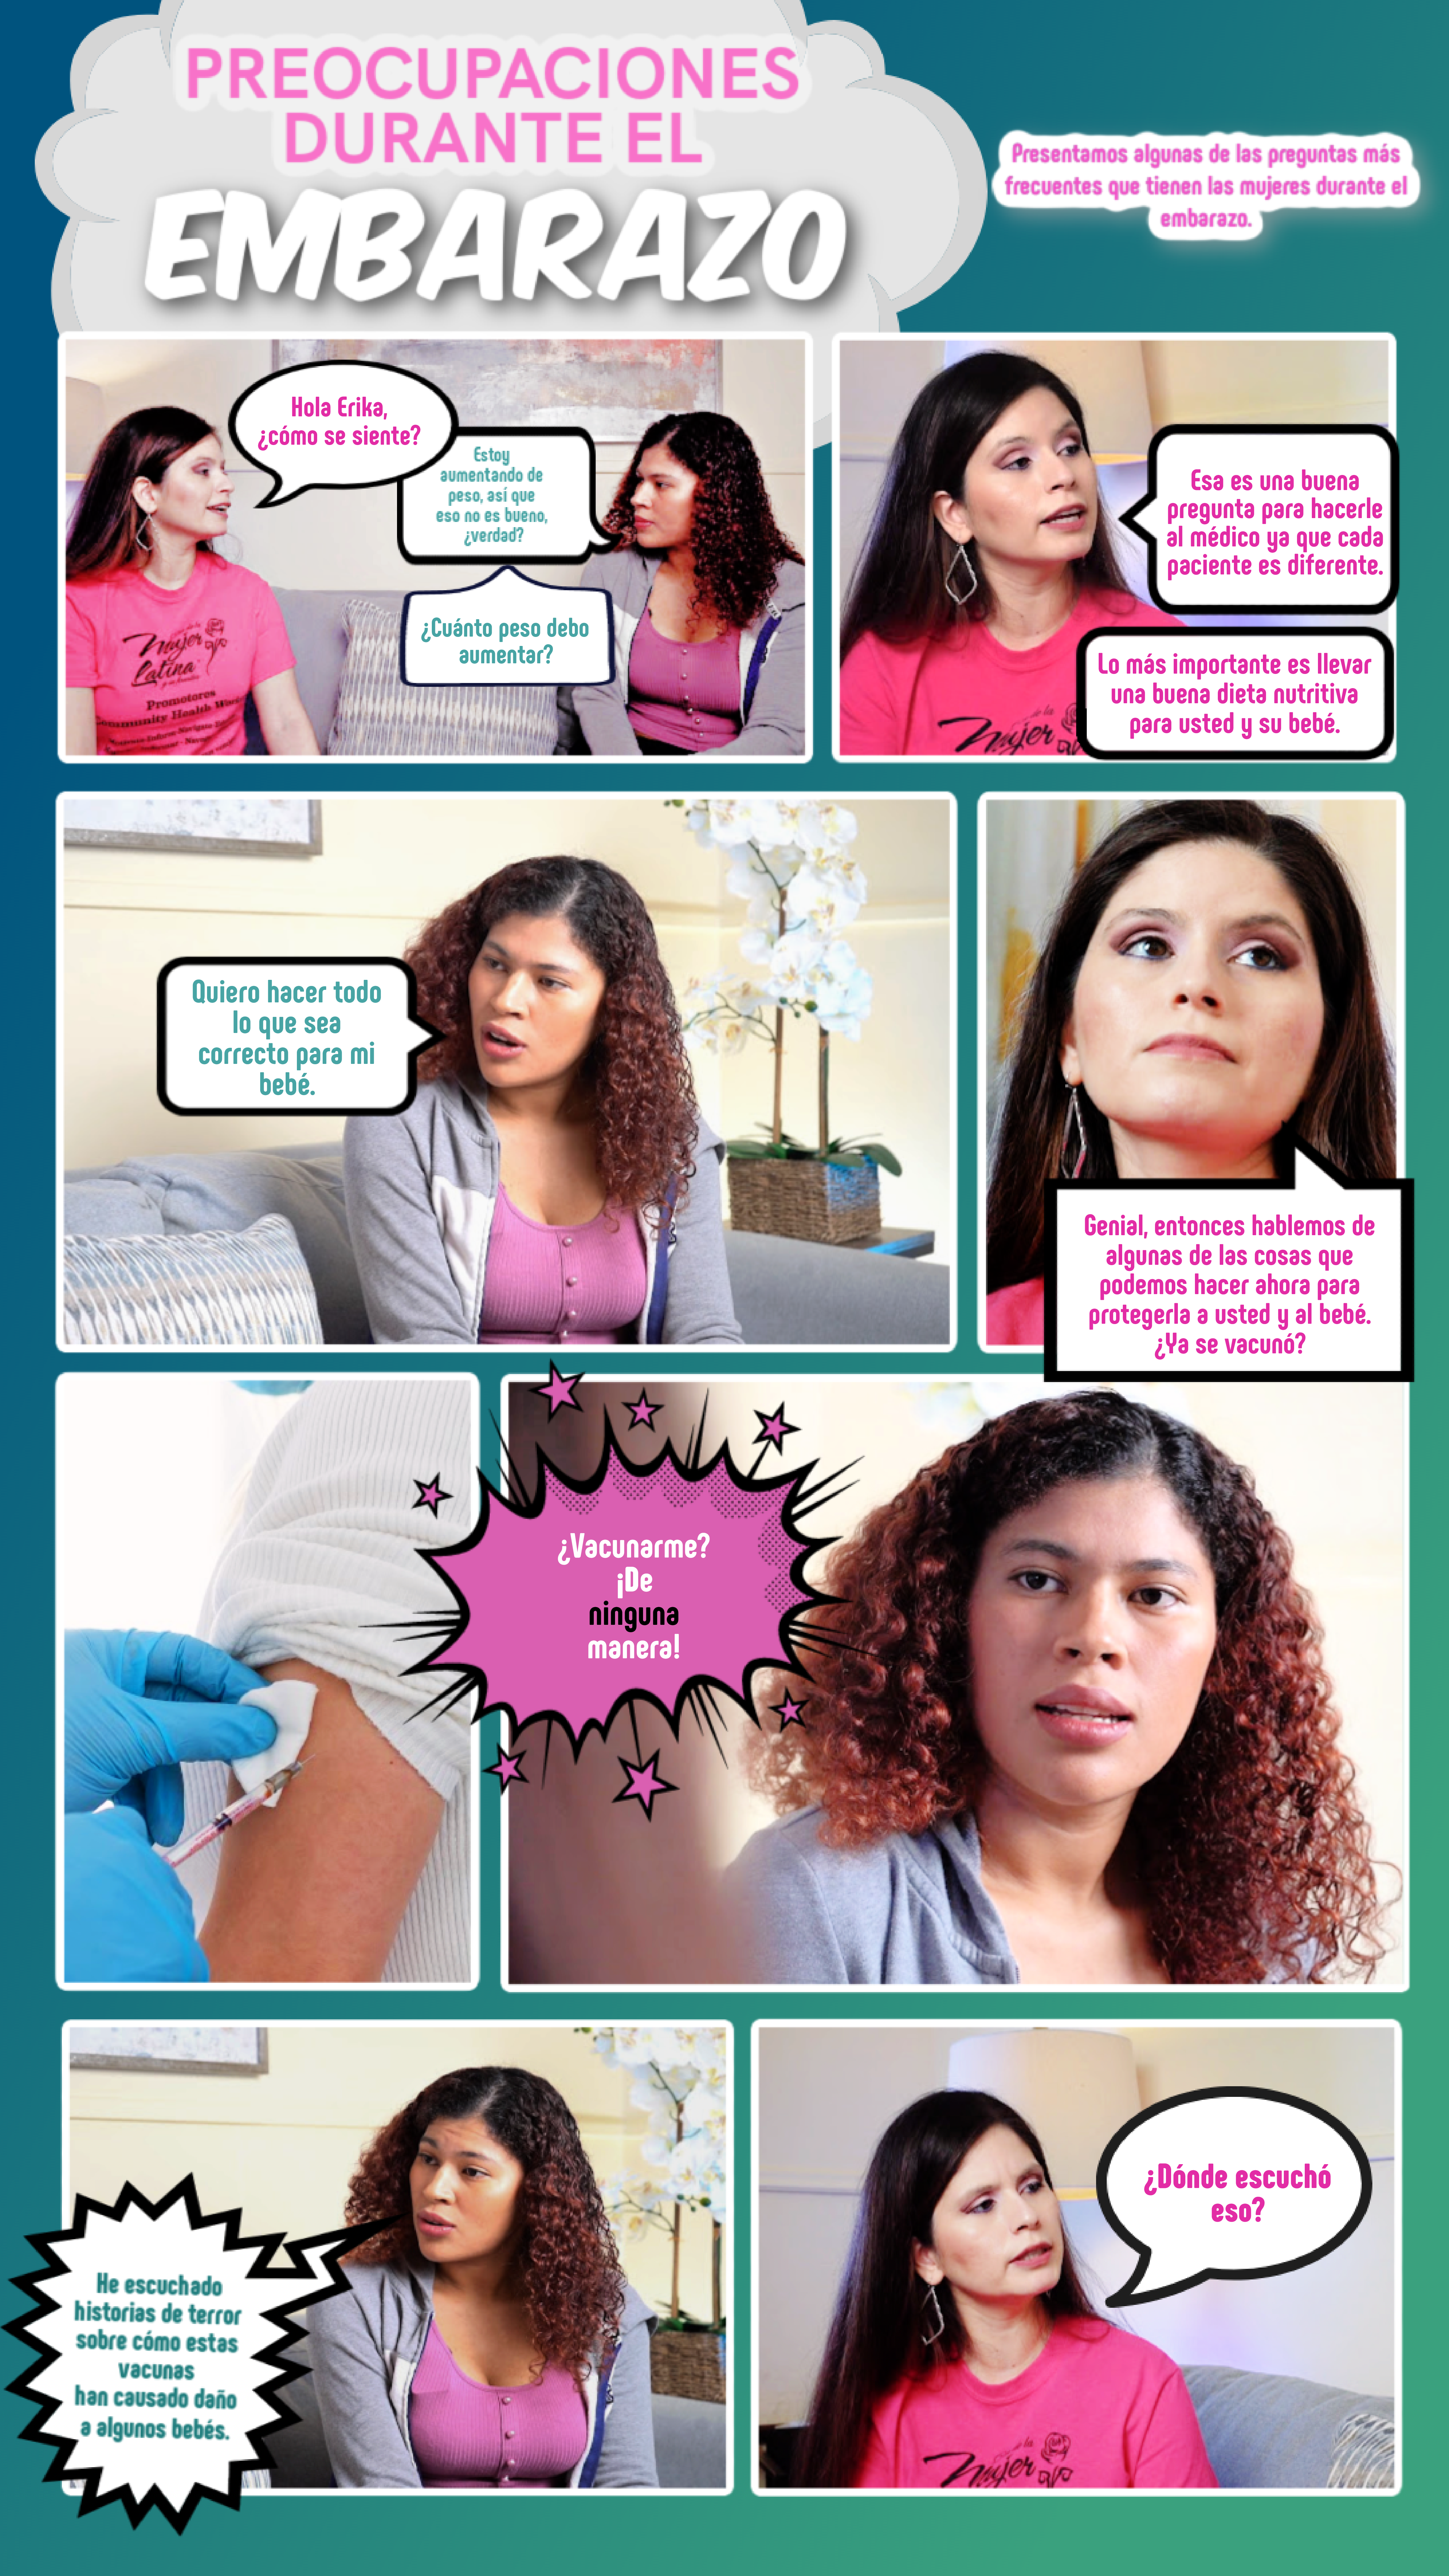 Comic strip of two Latina women discussing vaccines for pregnant women